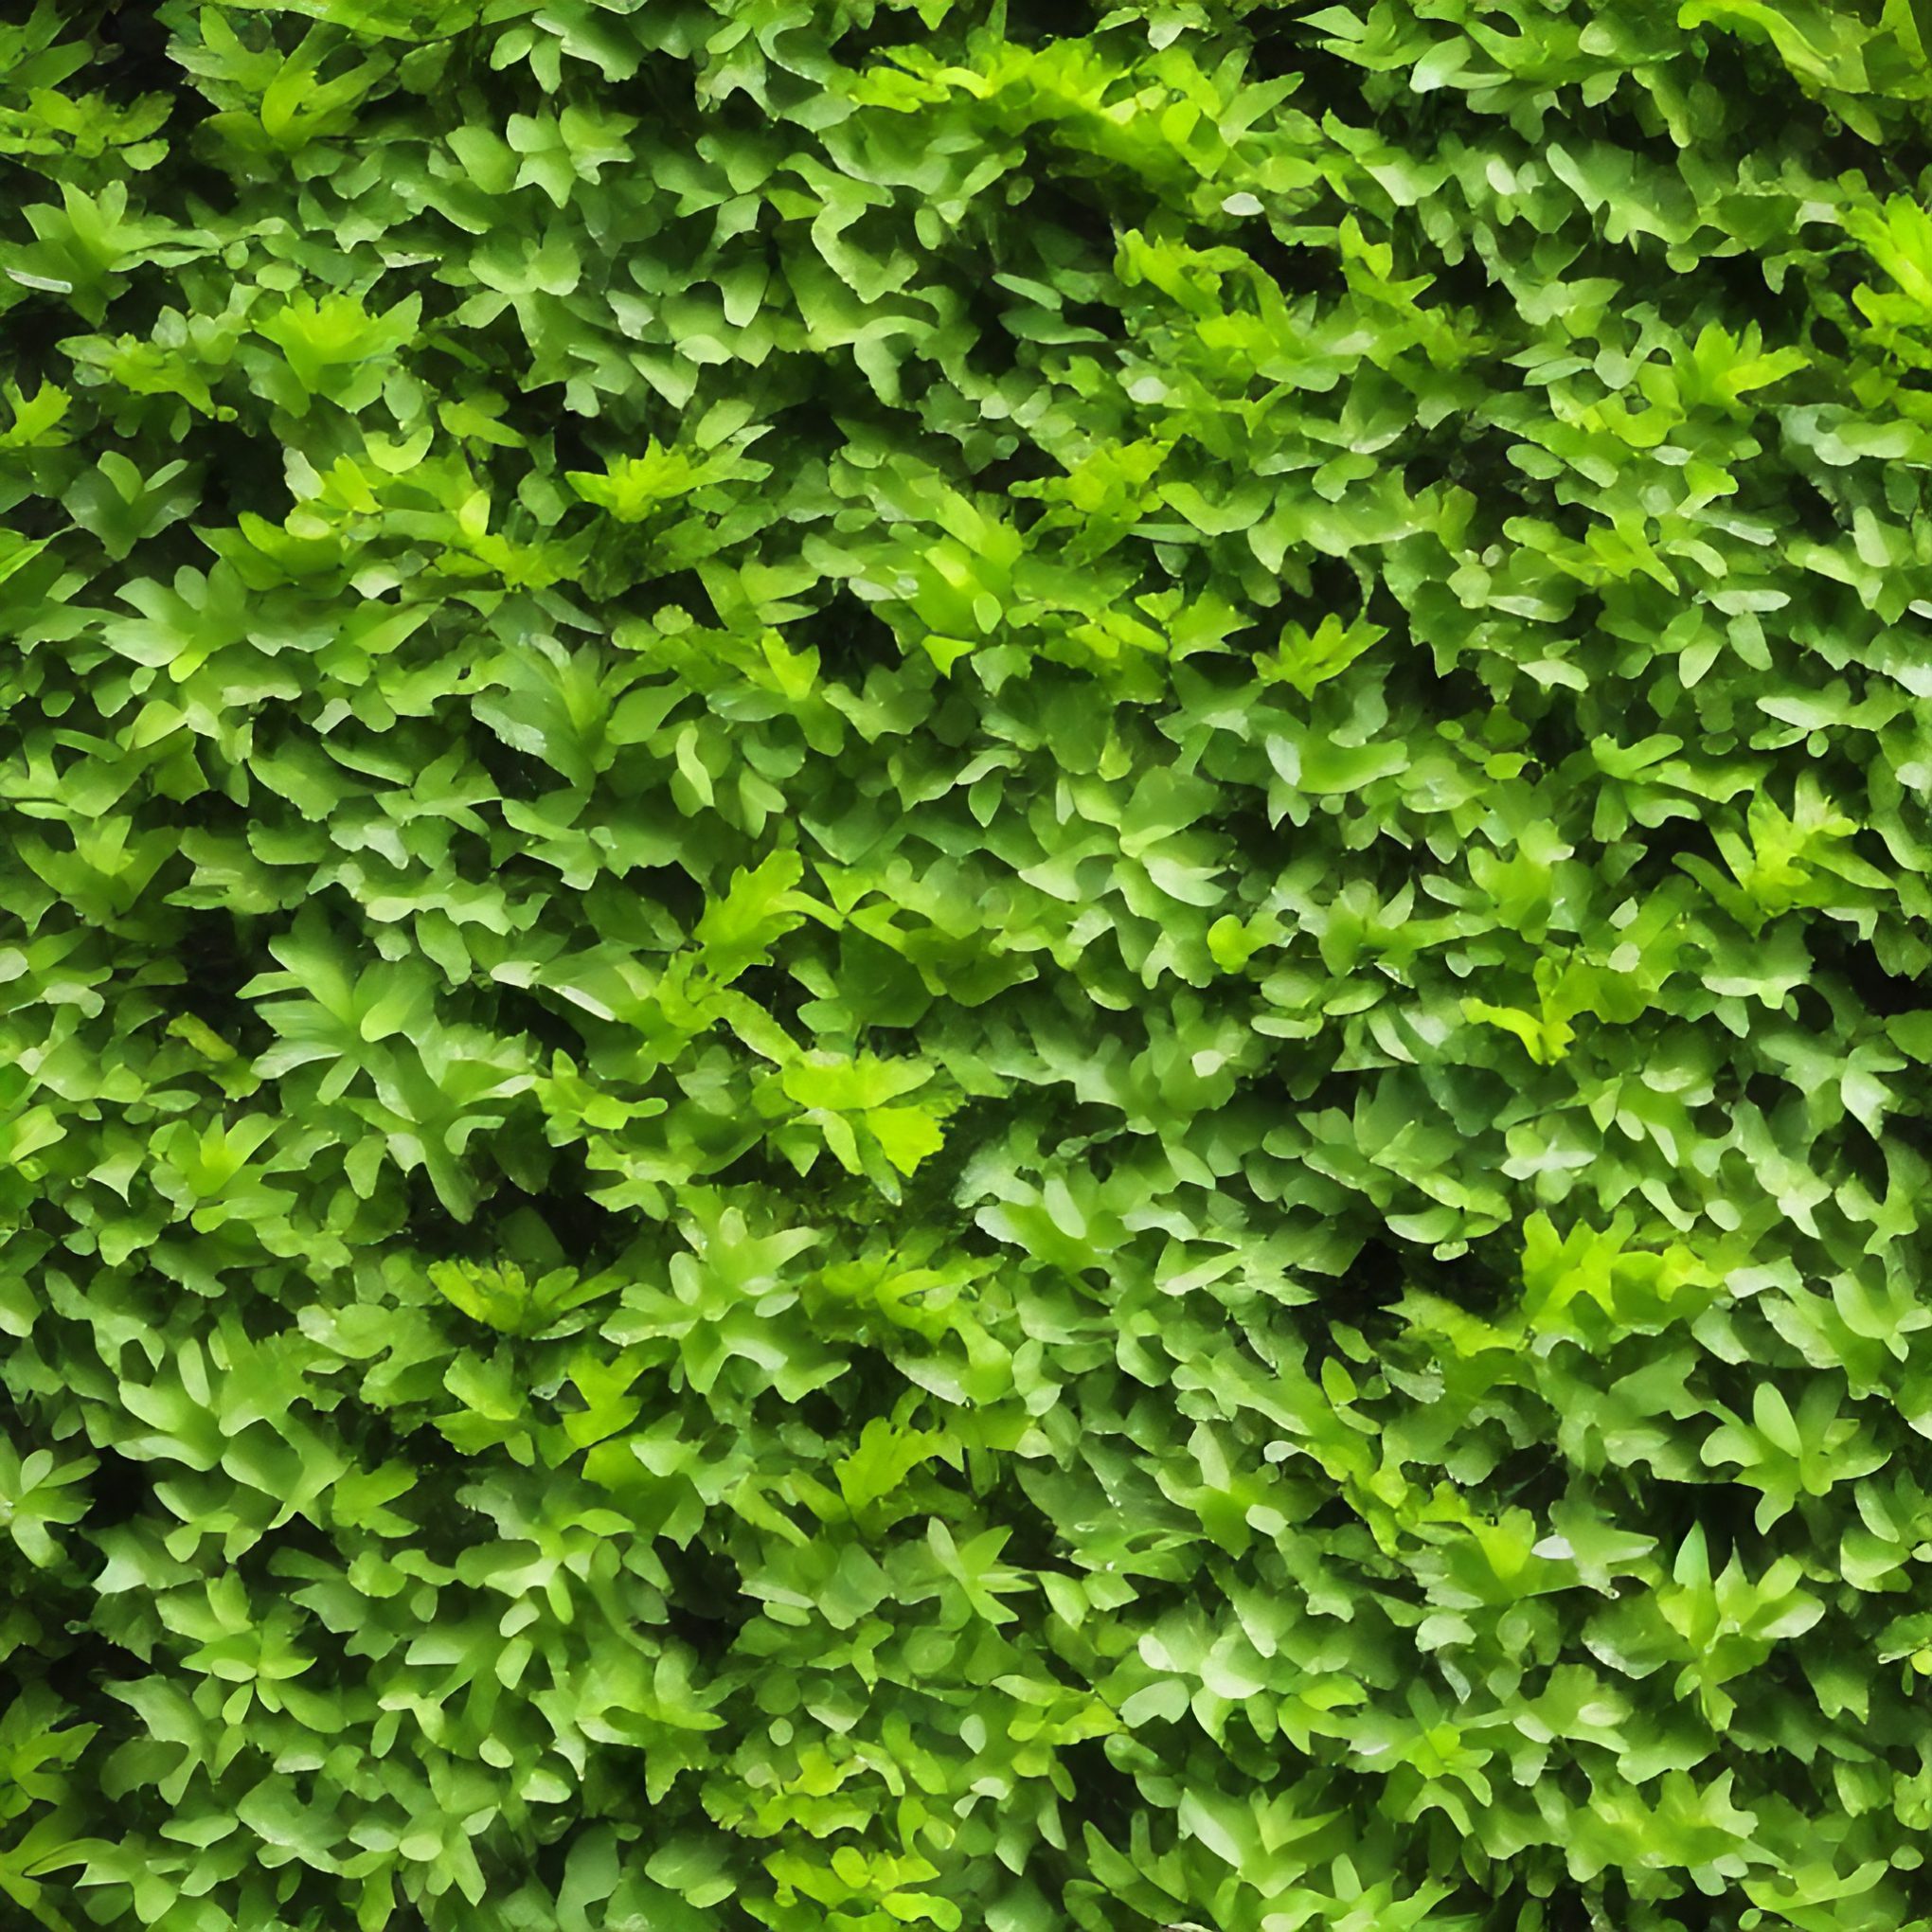 Painted Effect Green Plant Leaves Stock Image